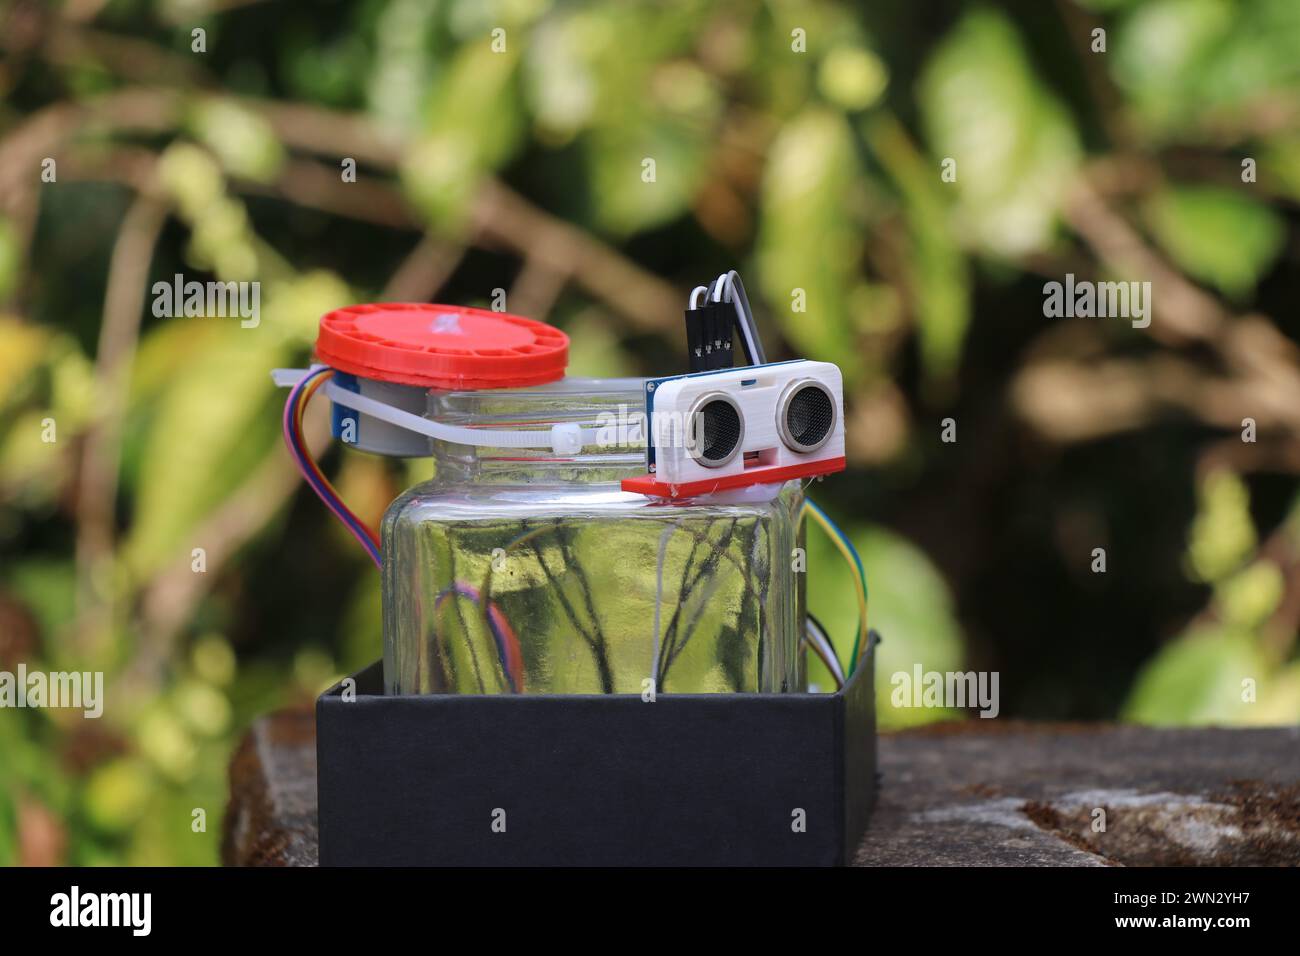 Automatic food dispenser for fish aquarium that dispenses tiny amounts of food when the sensor detects obstacles Stock Photo